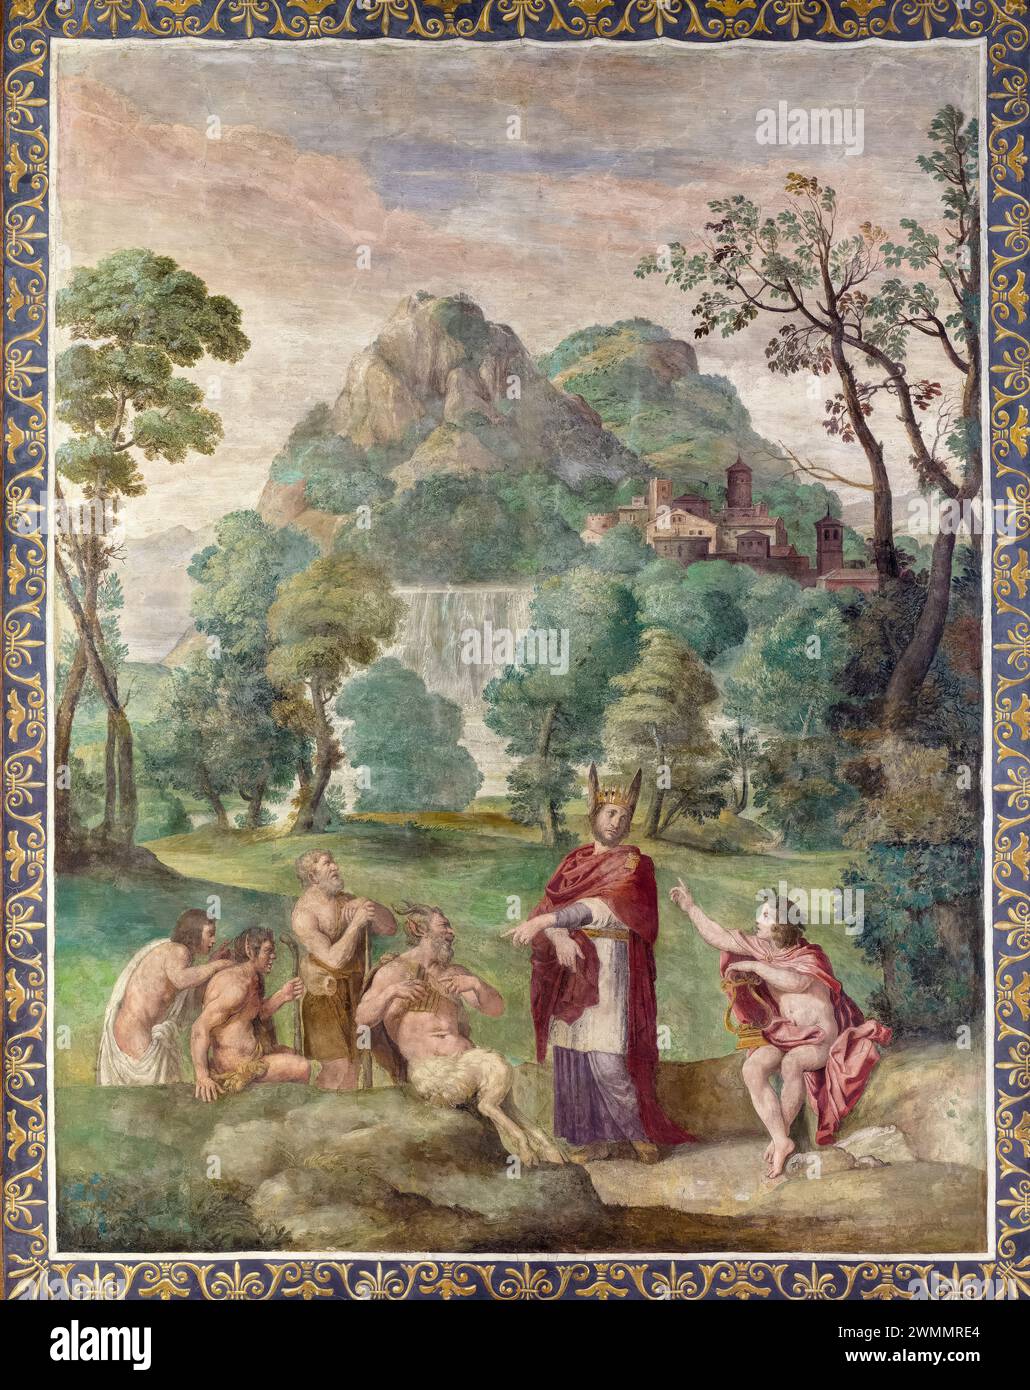 The Judgement of Midas fresco painting transferred to canvas and mounted on board by Domenico Zampieri called Domenichino and workshop, 1616-1618 Stock Photo